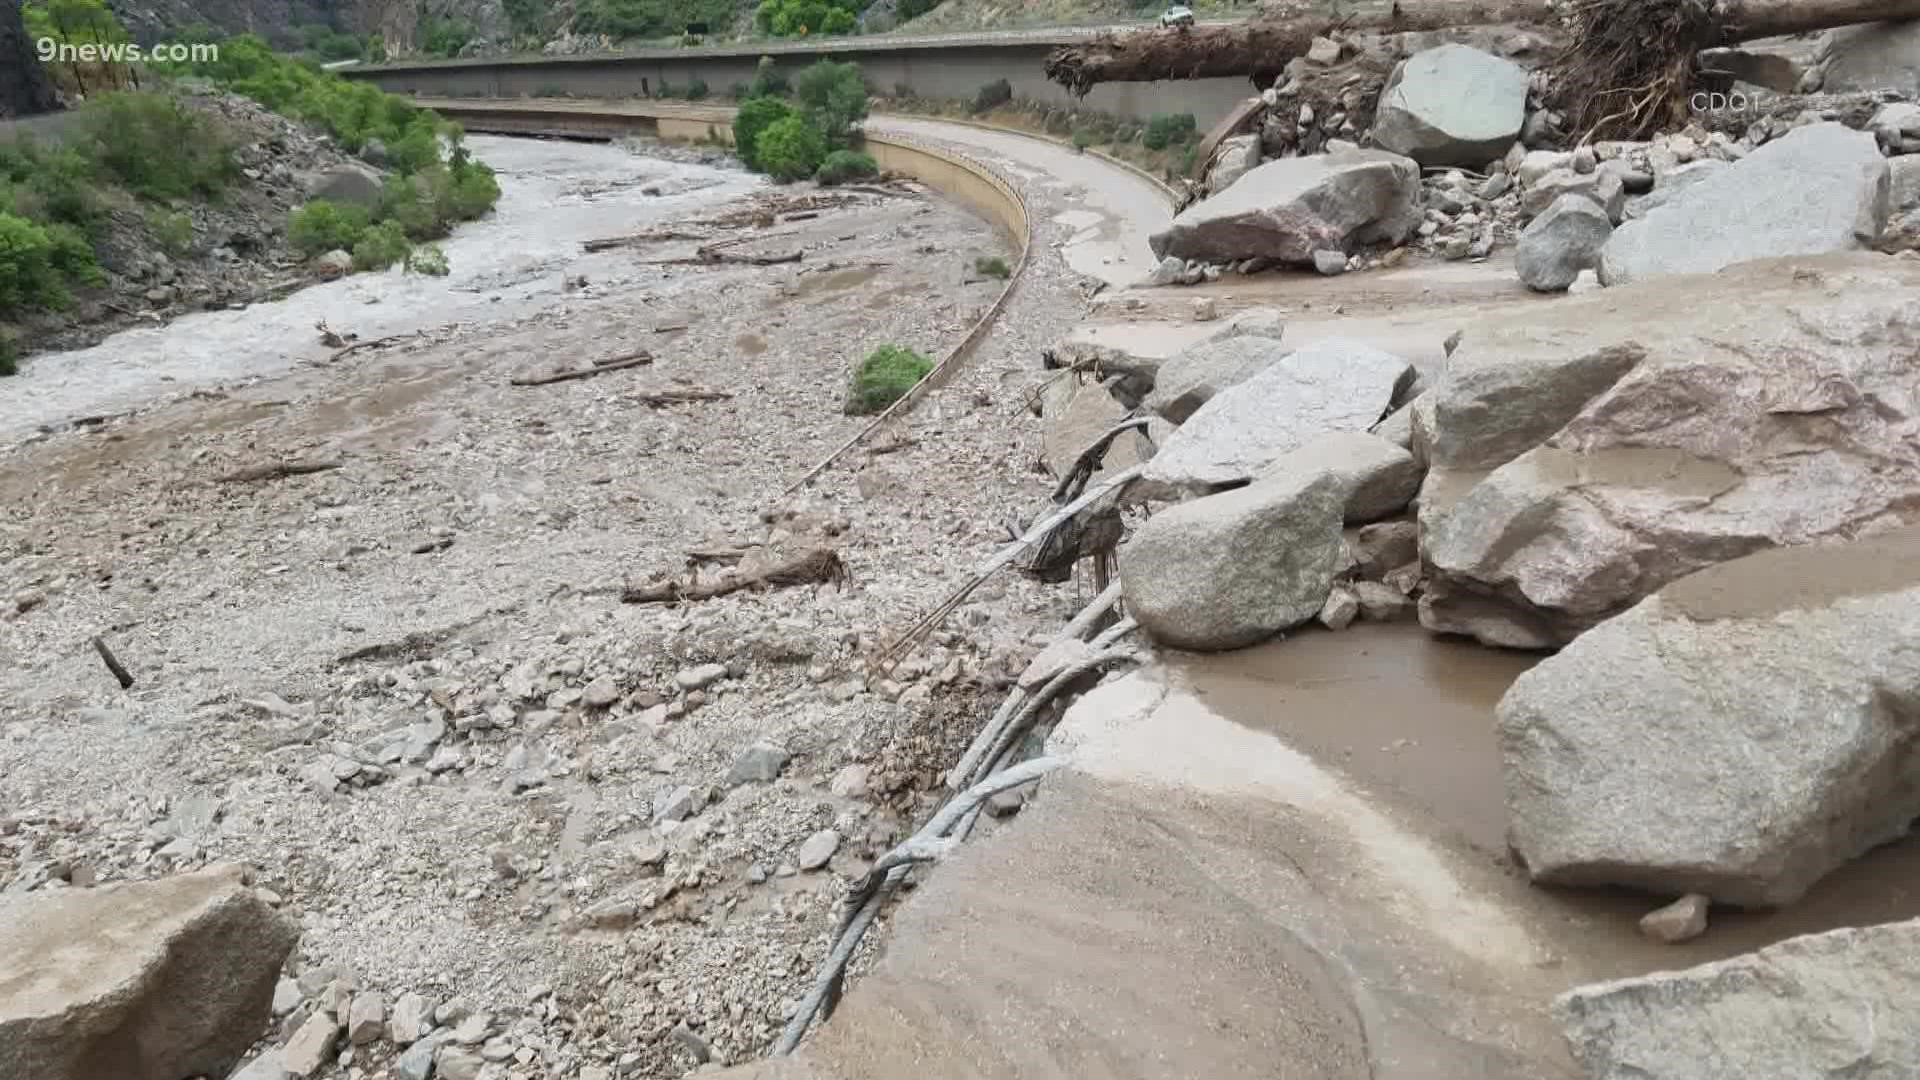 Gov. Polis announced he's preparing to issue a state disaster declaration for Glenwood Canyon, following repeated mudslides across Interstate 70 this summer.